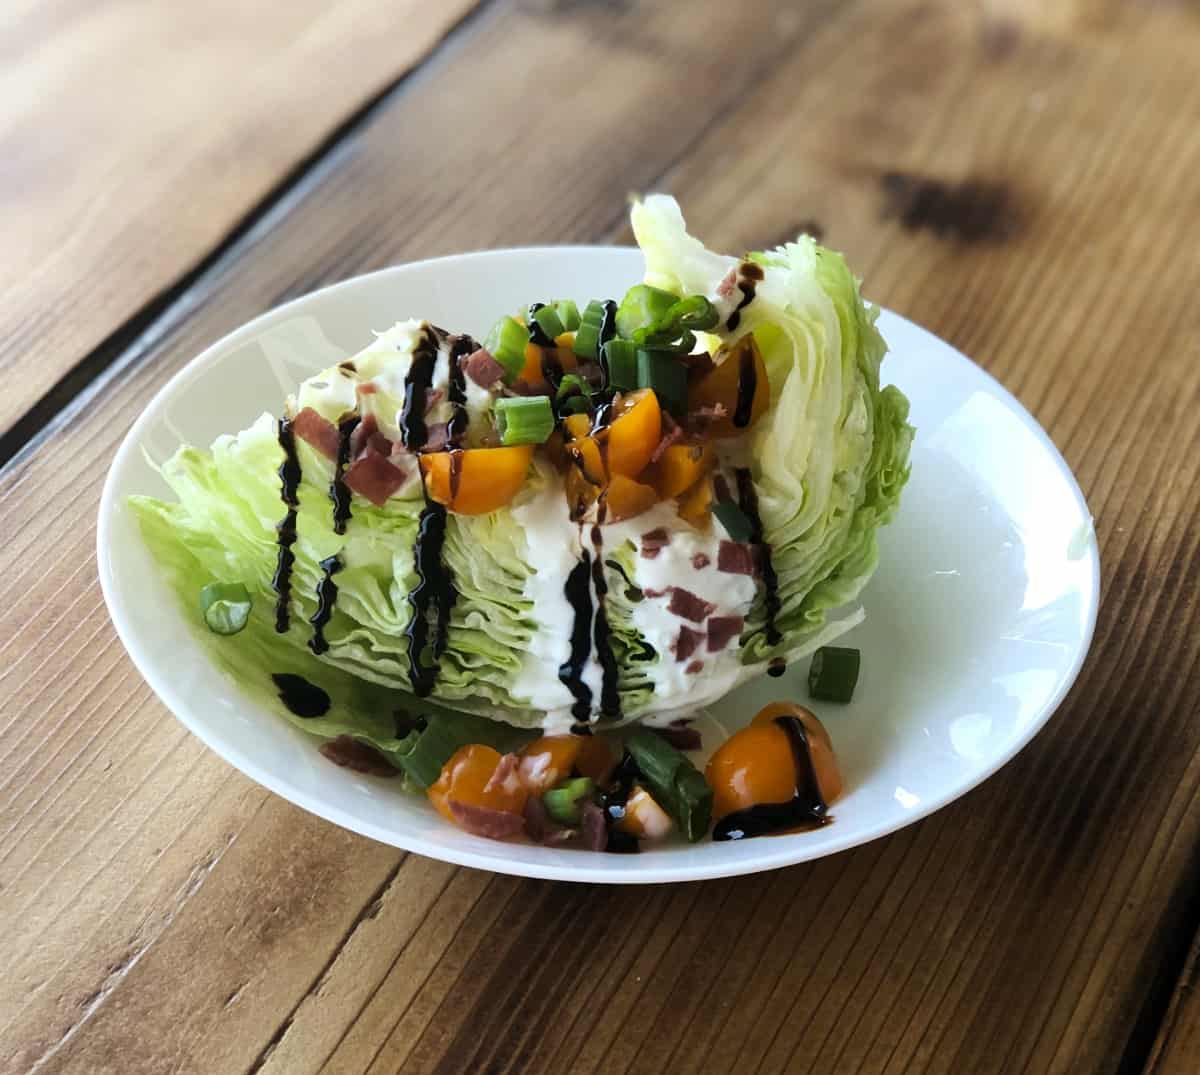 Iceberge wedge salad with chopped tomatoes and bacon bits on wooden table.